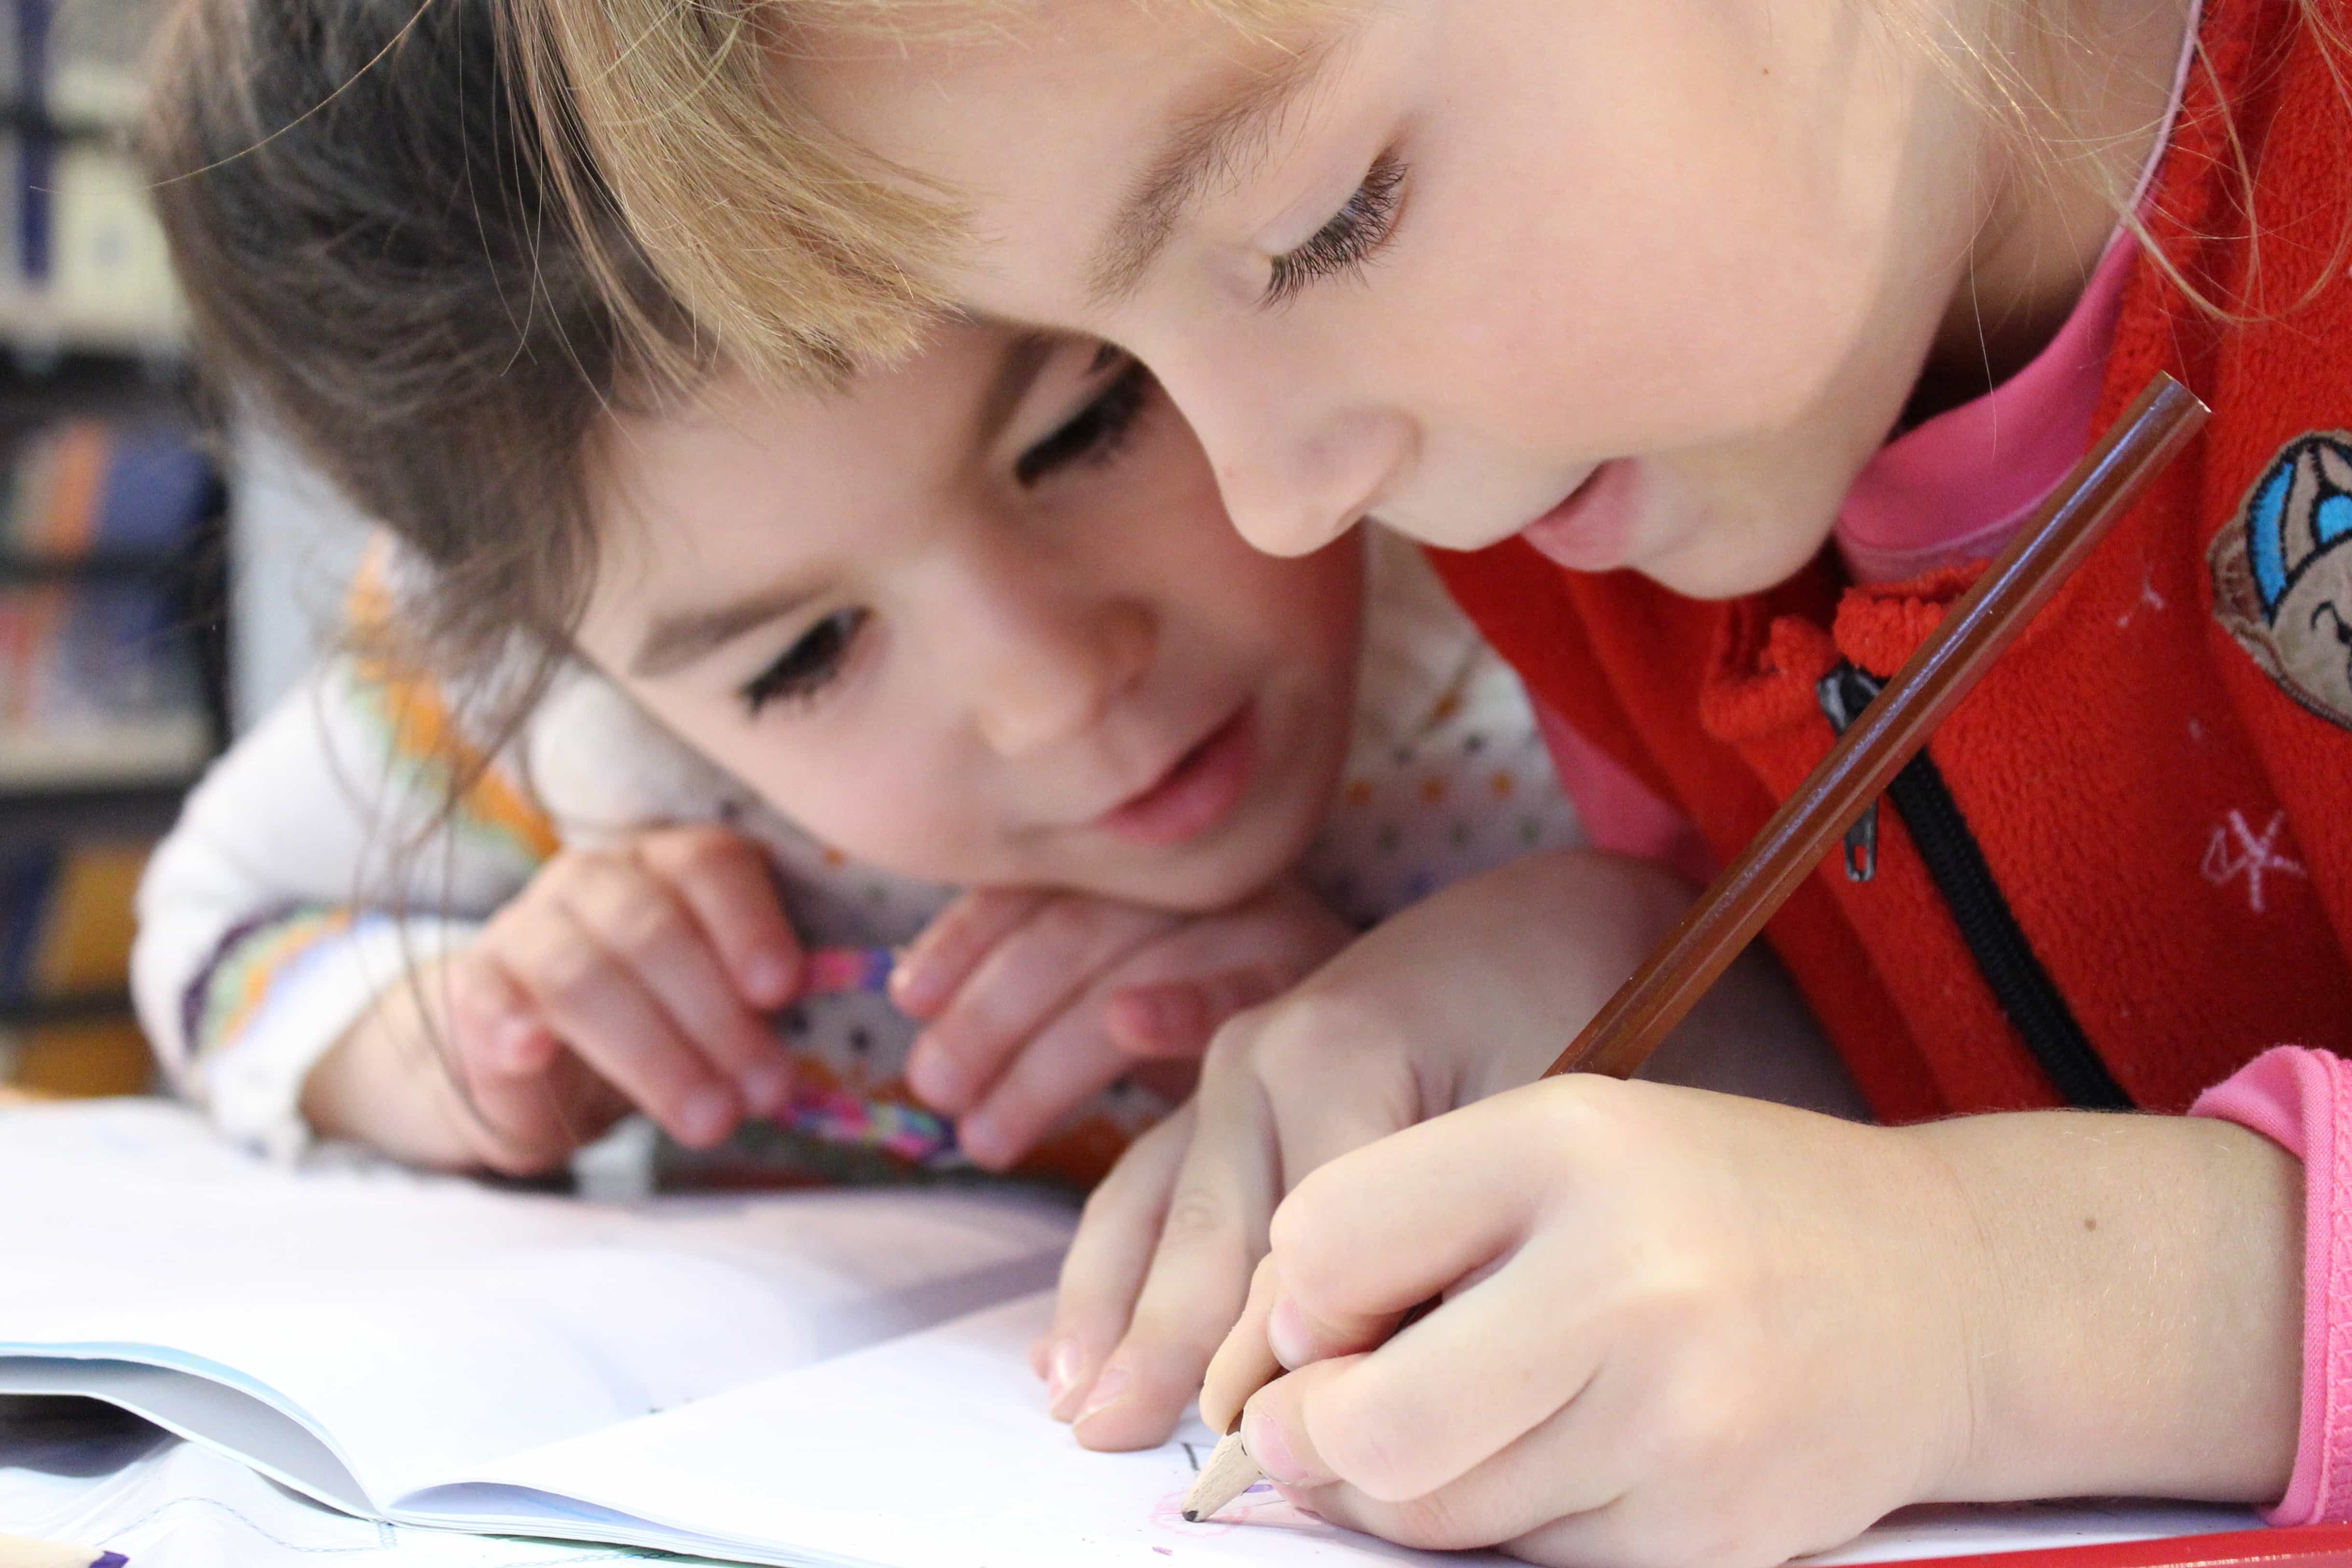 How to inspire your child to develop a lifelong love of learning?